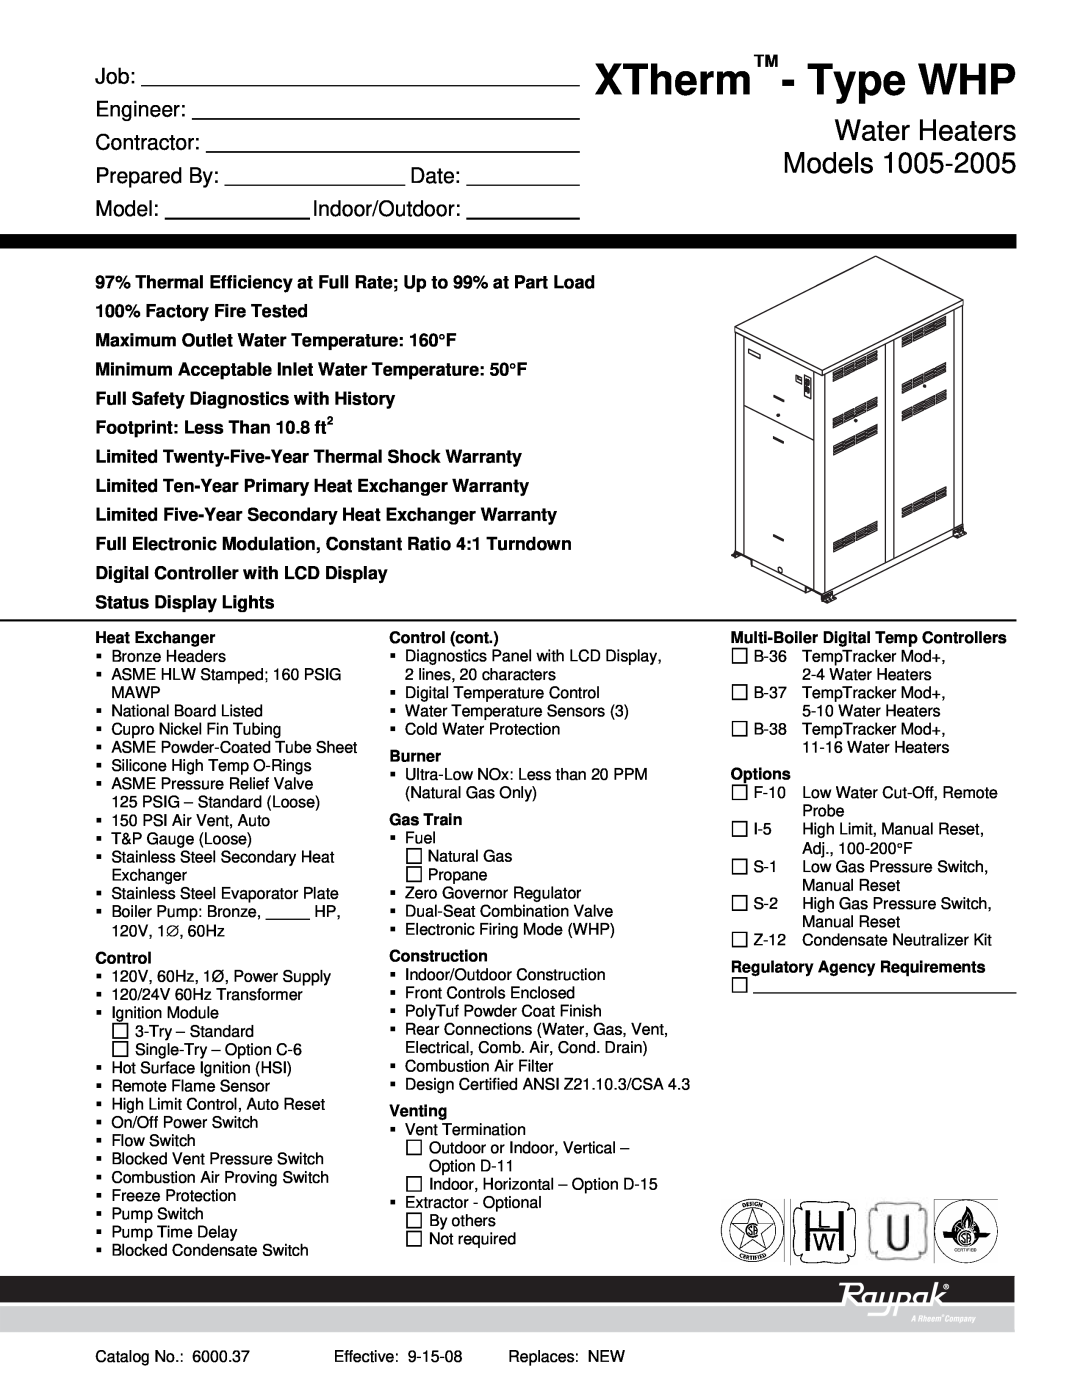 Raypak 1005-2005 warranty XTherm- Type H, Heating Boilers Models, Job Engineer Contractor, Prepared By, Date 